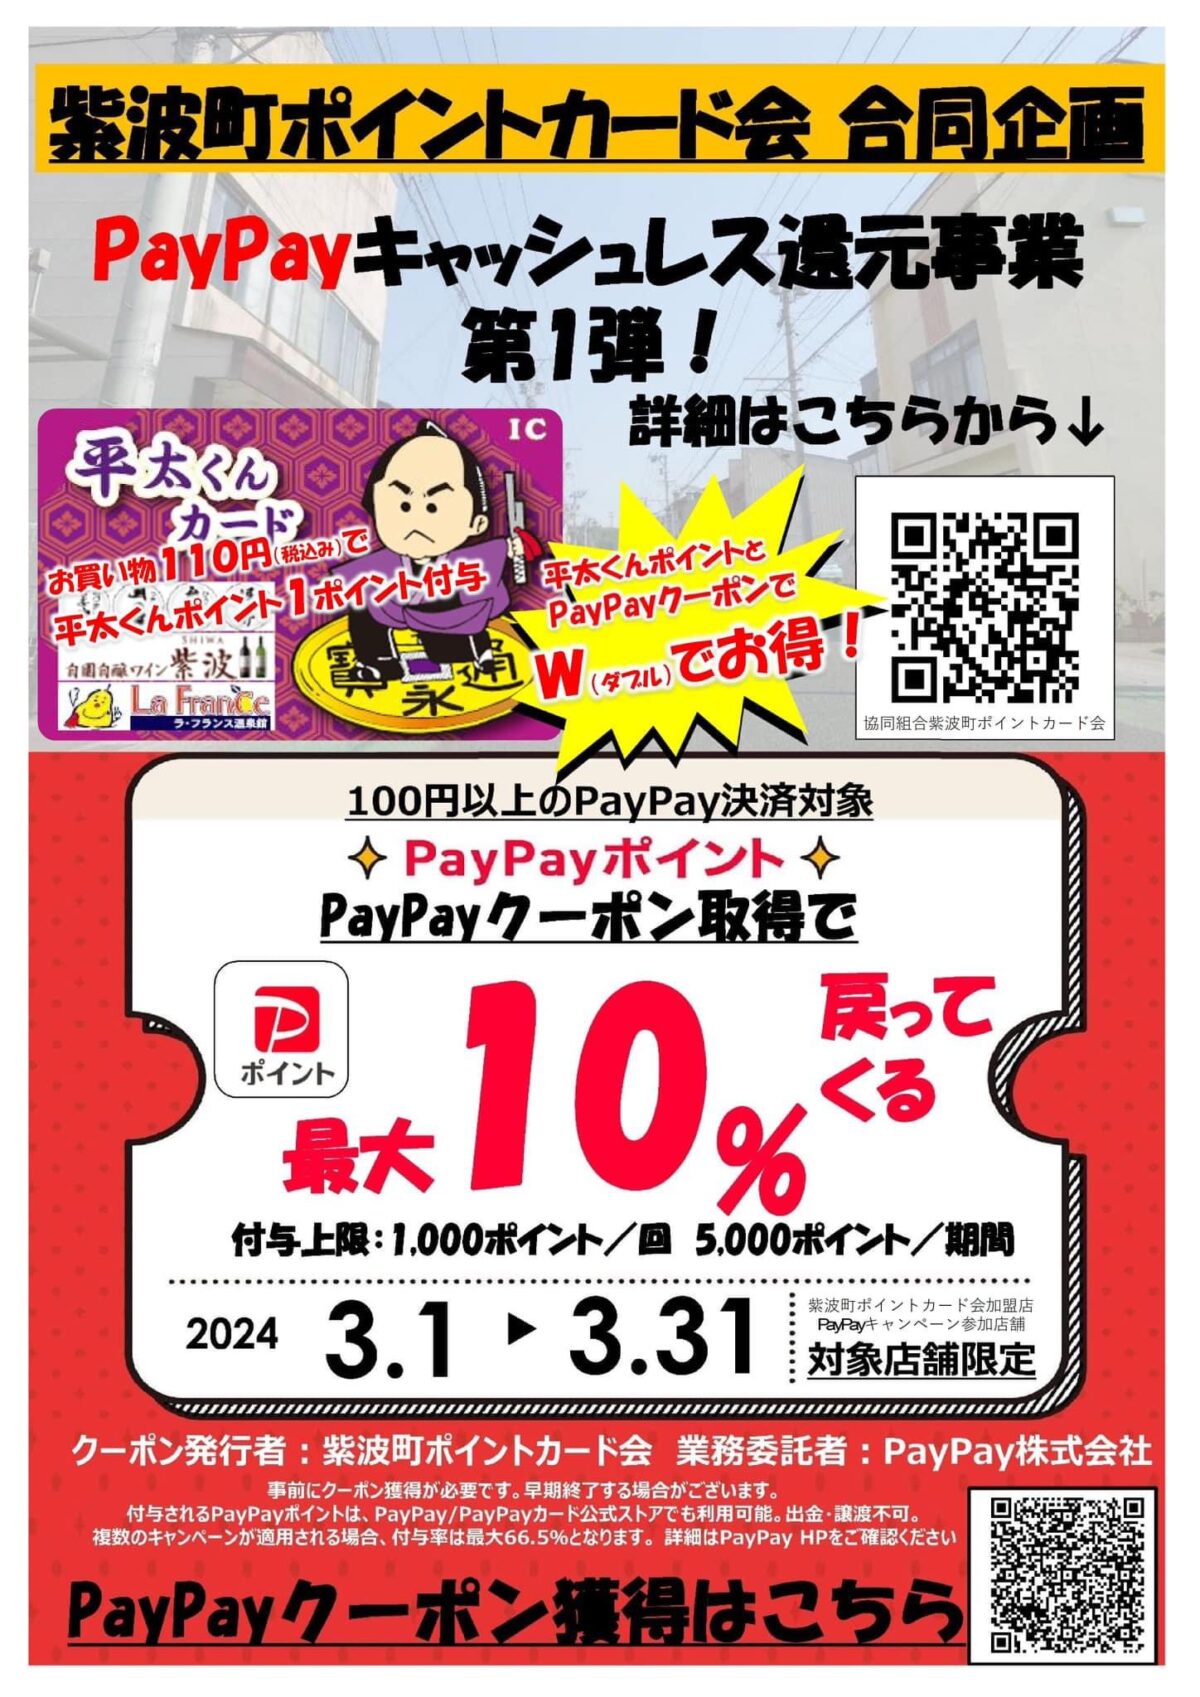 PayPay10%還元セール開催✨